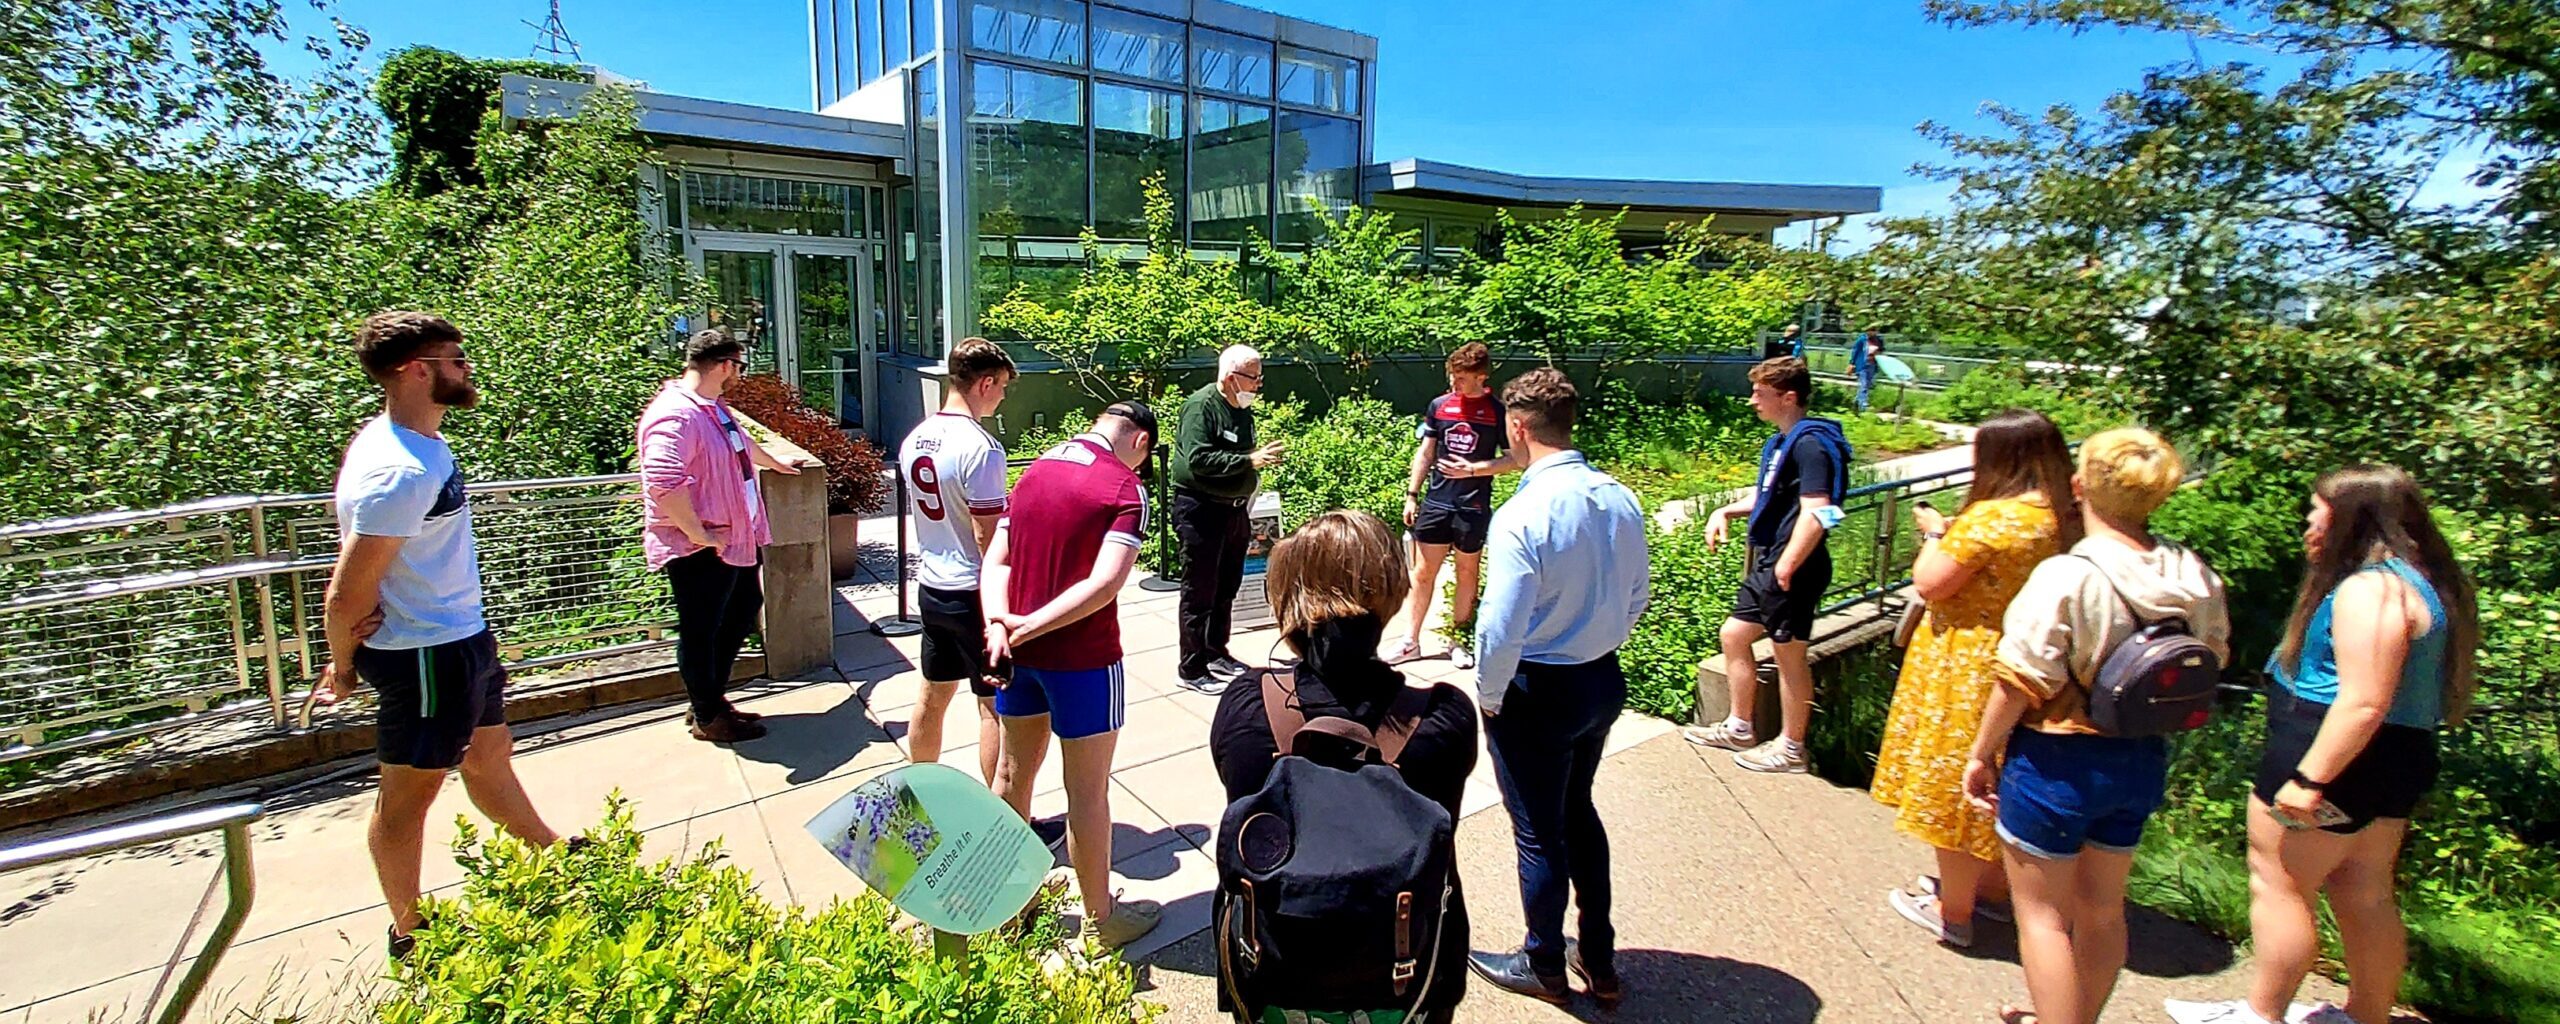 Instructor with a group of students outside in front of a high performance building